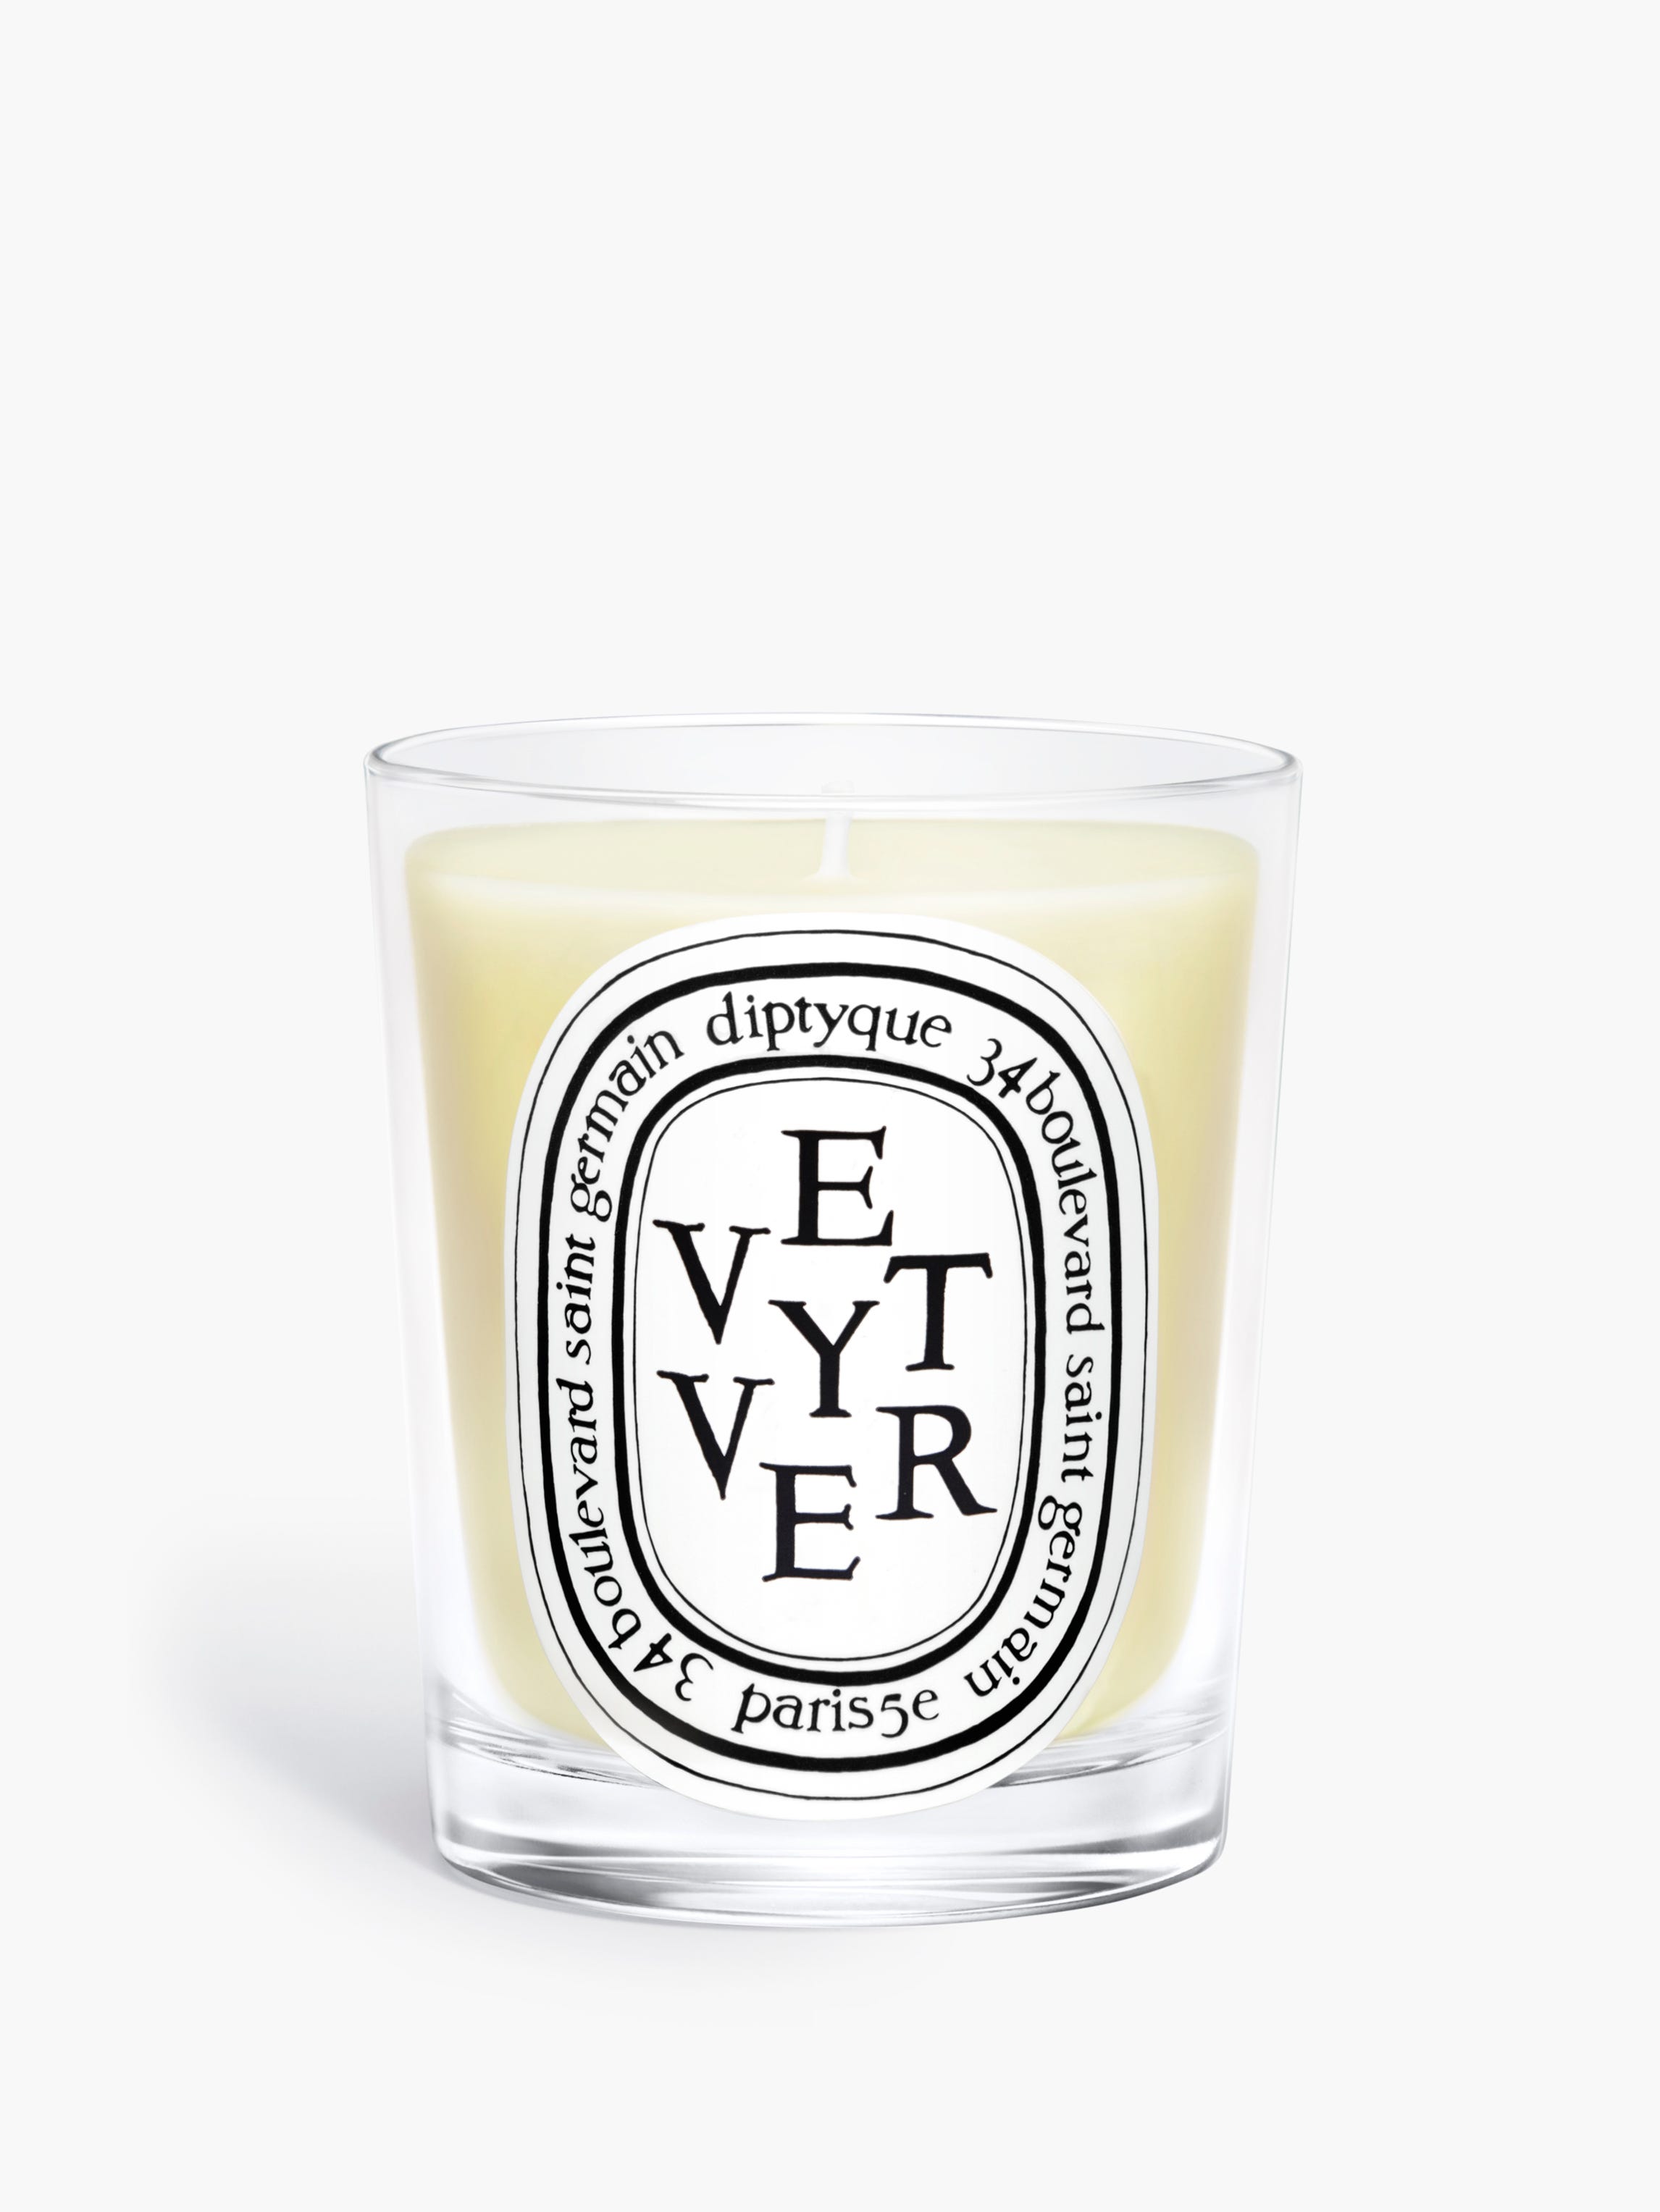 Vétyver (Vetiver) - Classic Candle